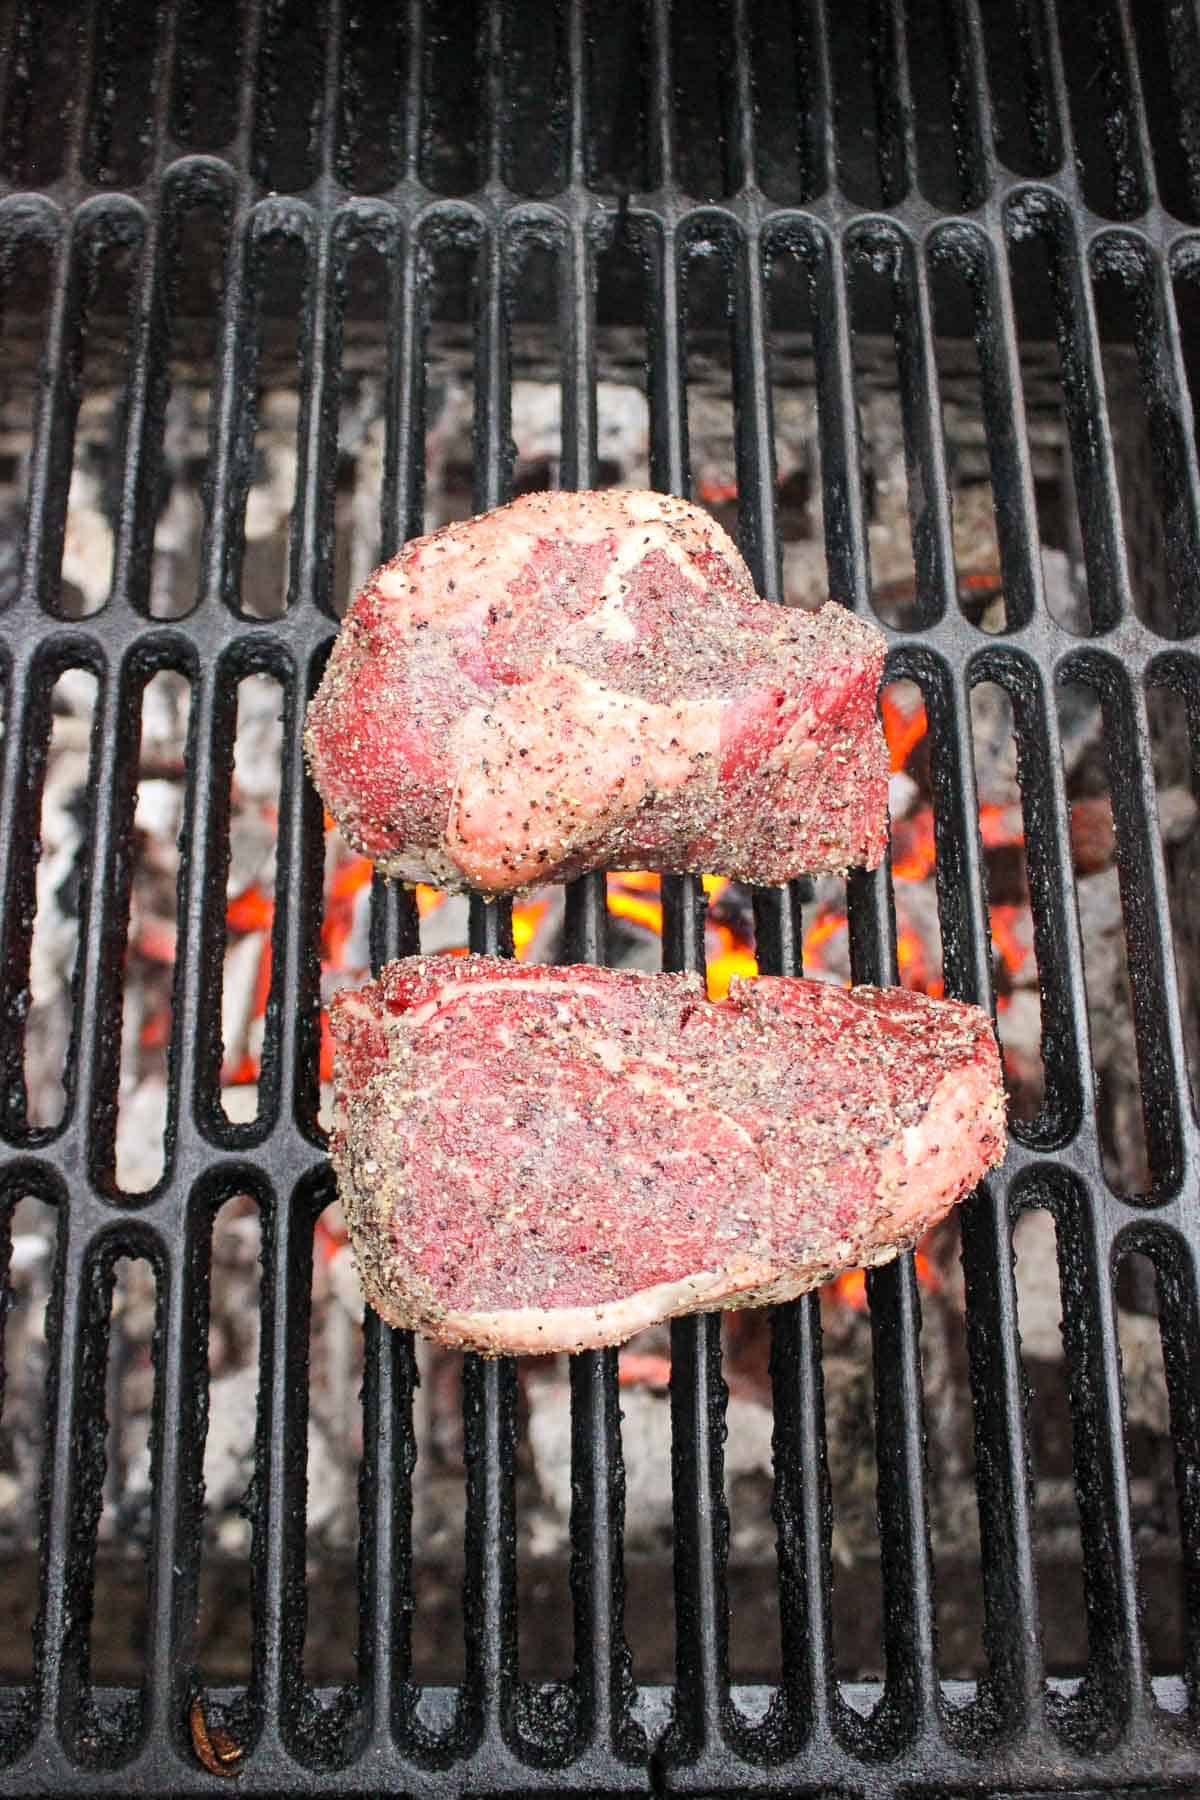 The raw steaks set on the grill so that they can start cooking.